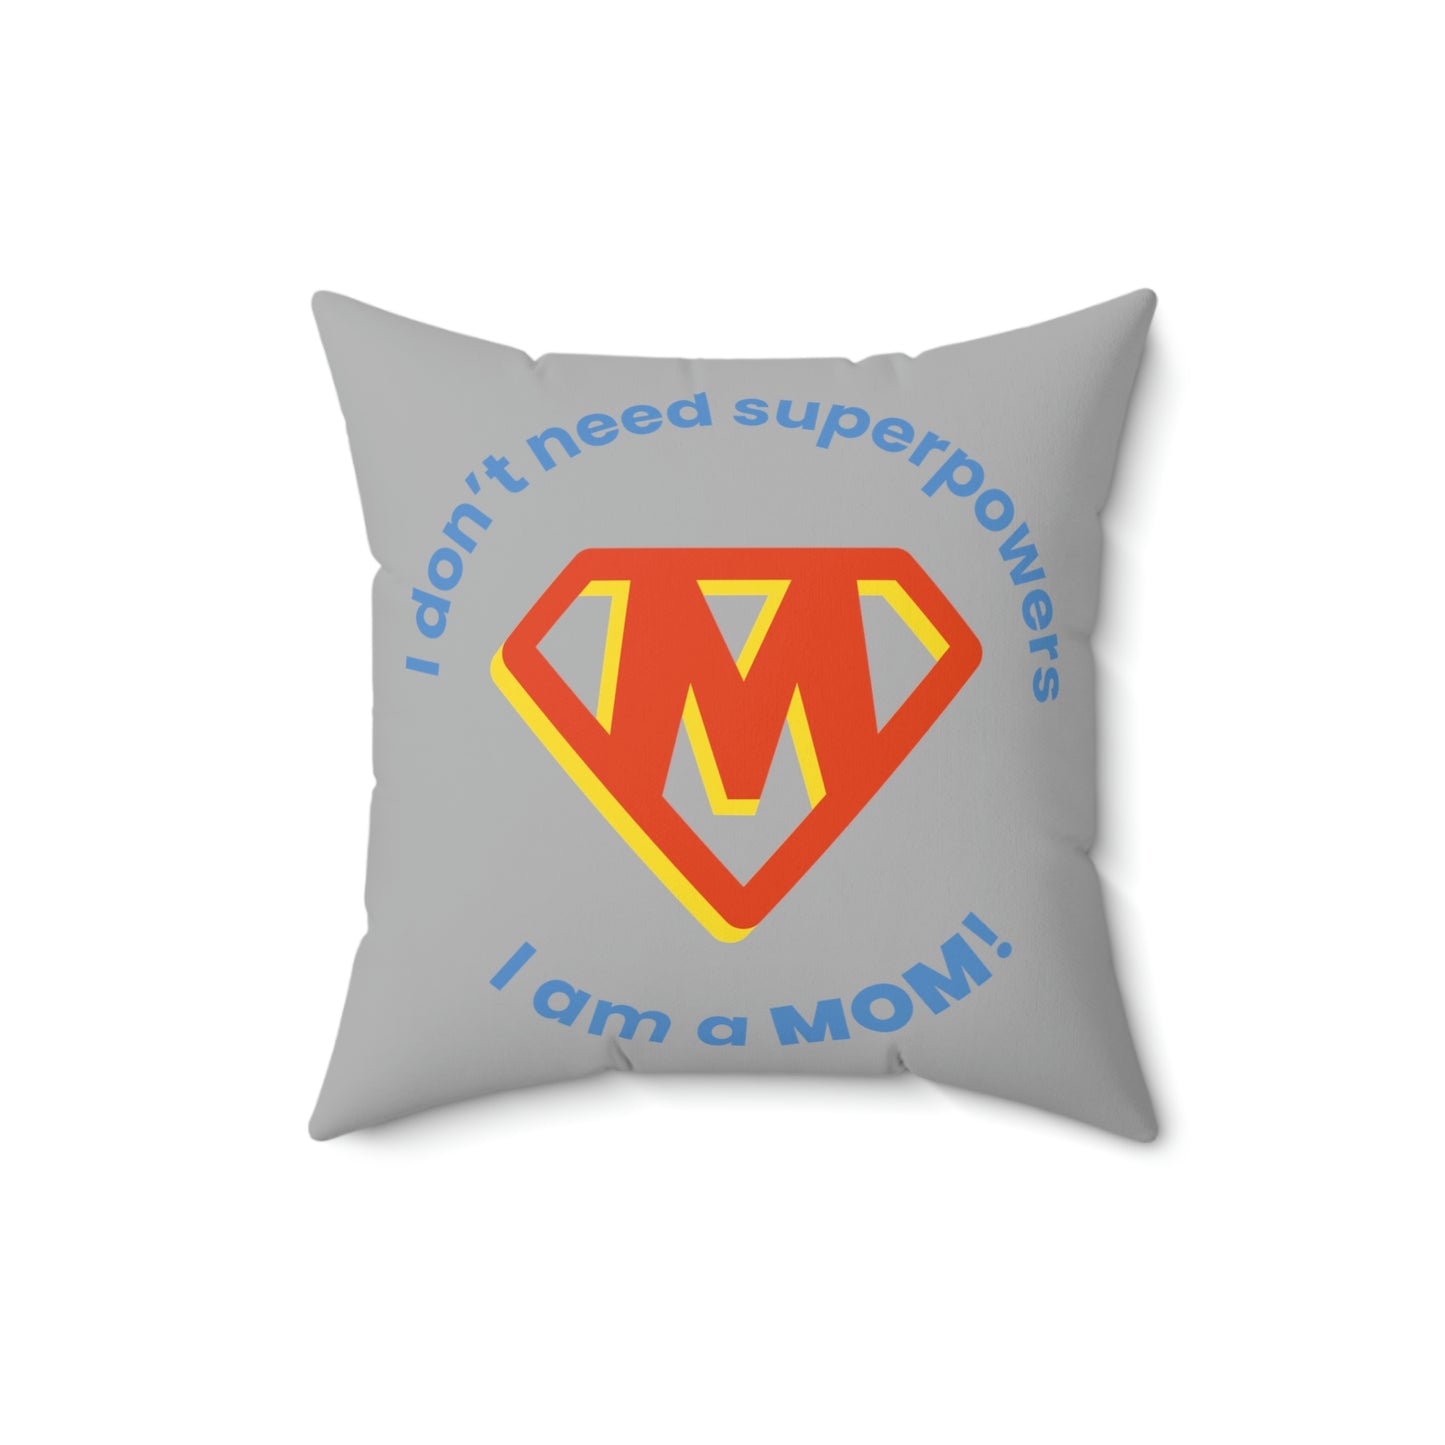 Spun Polyester Square Pillow Case "I am a Mom on Light Gray”